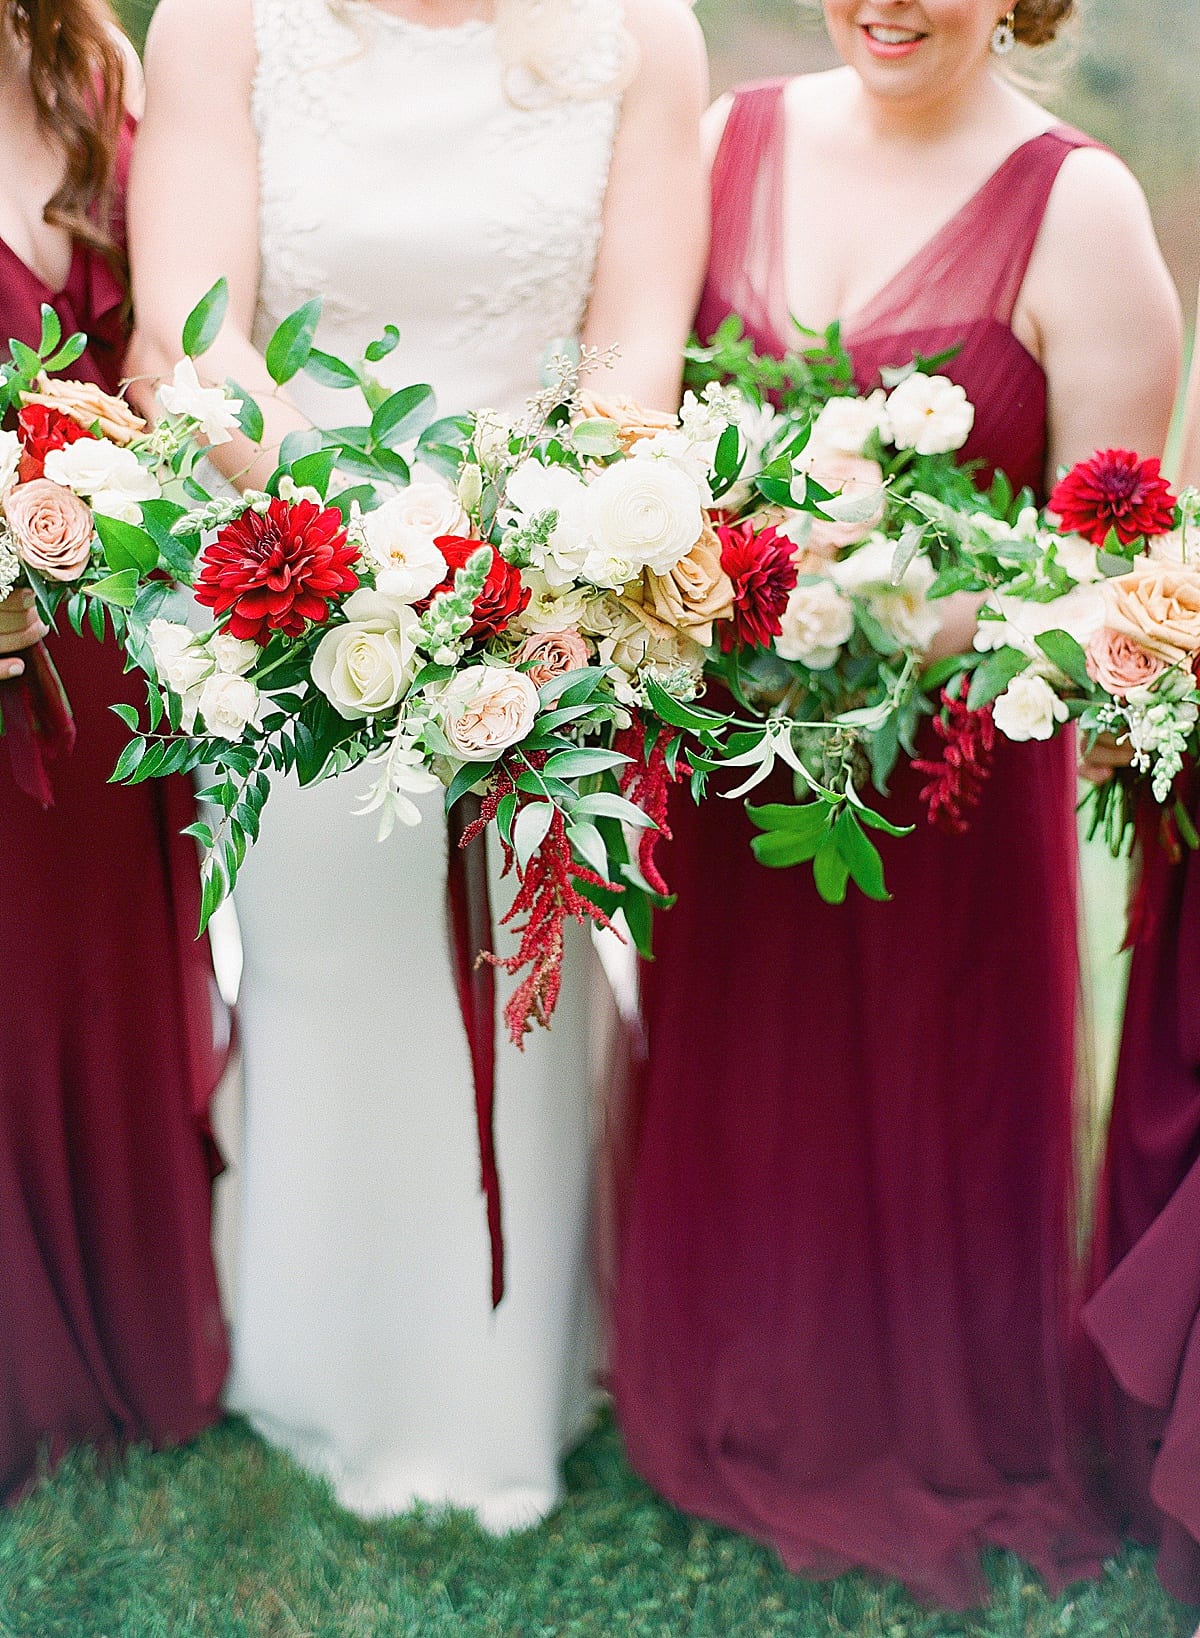 Detail of Bride and Bridesmaids Holding Bouquets Photo